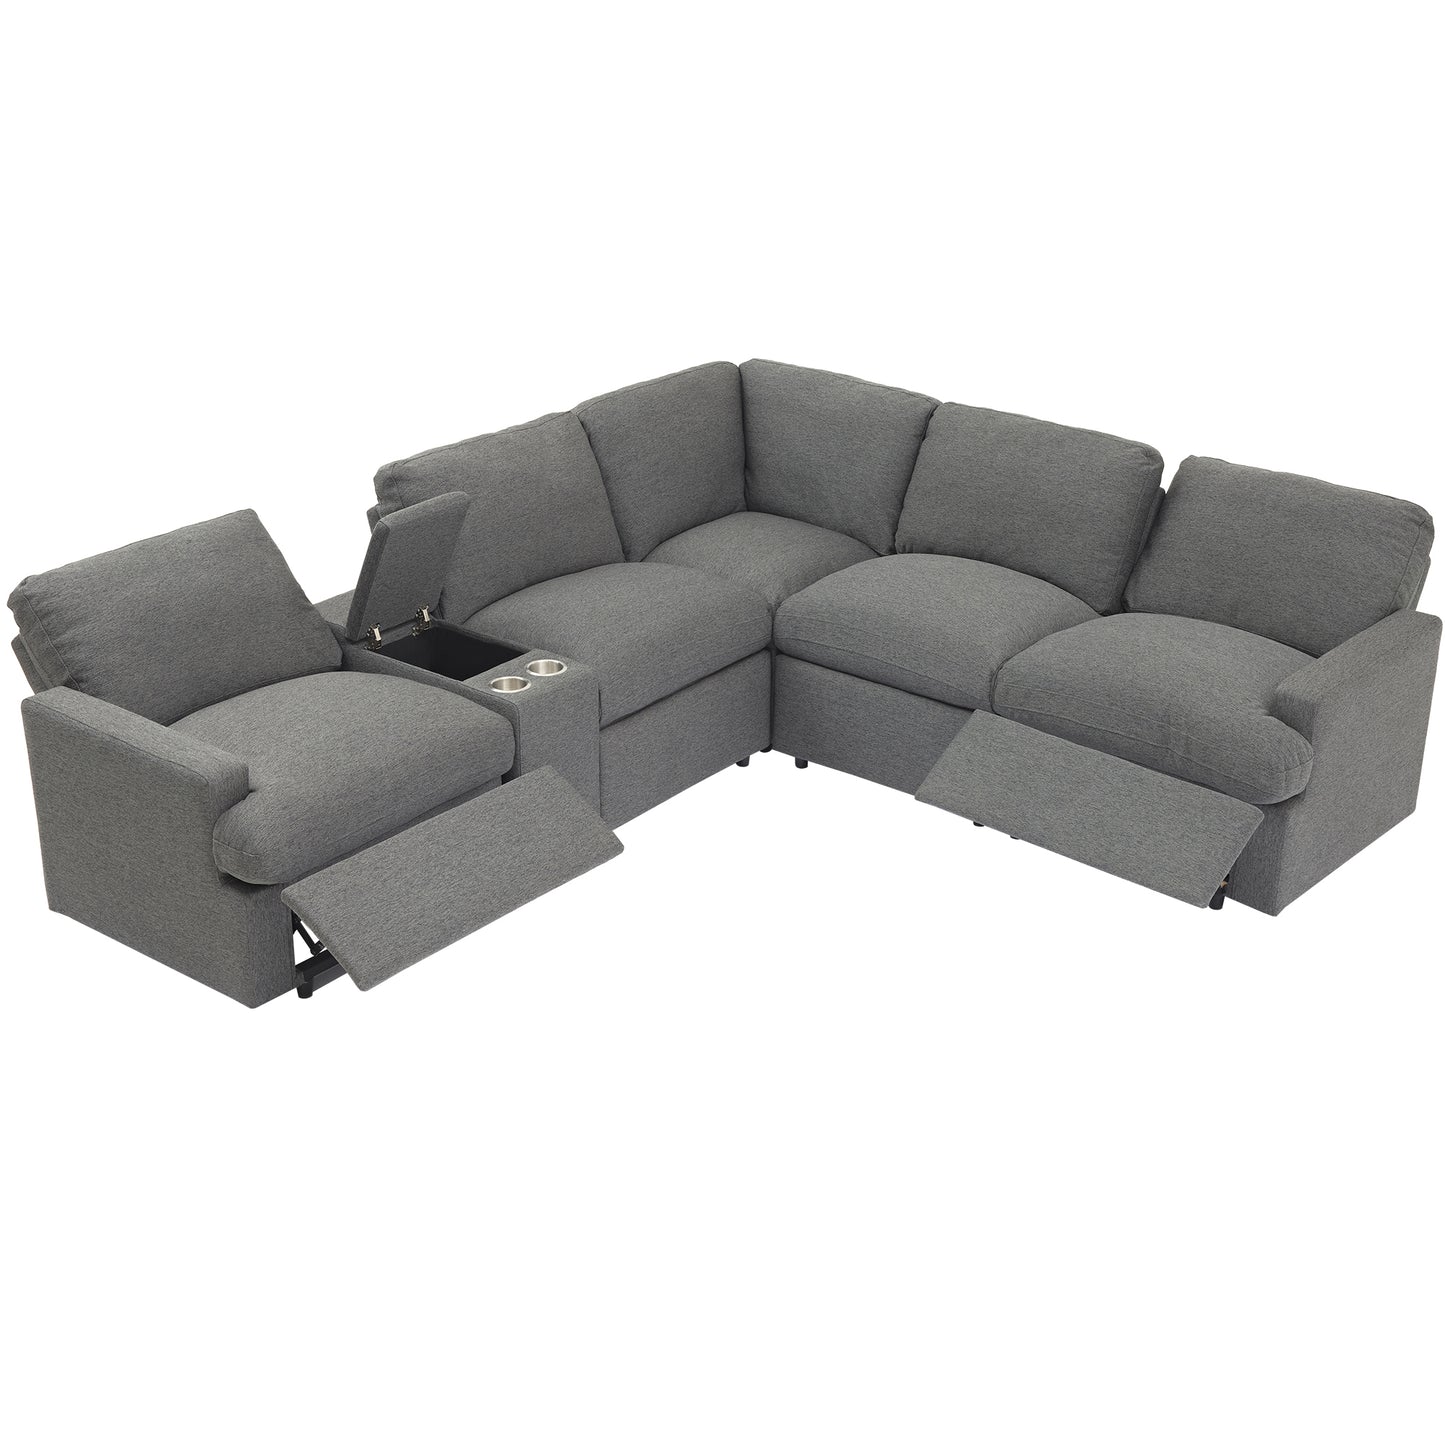 Luxury Dark Grey Power Recliner Sectional Sofa with USB Ports and Storage Box